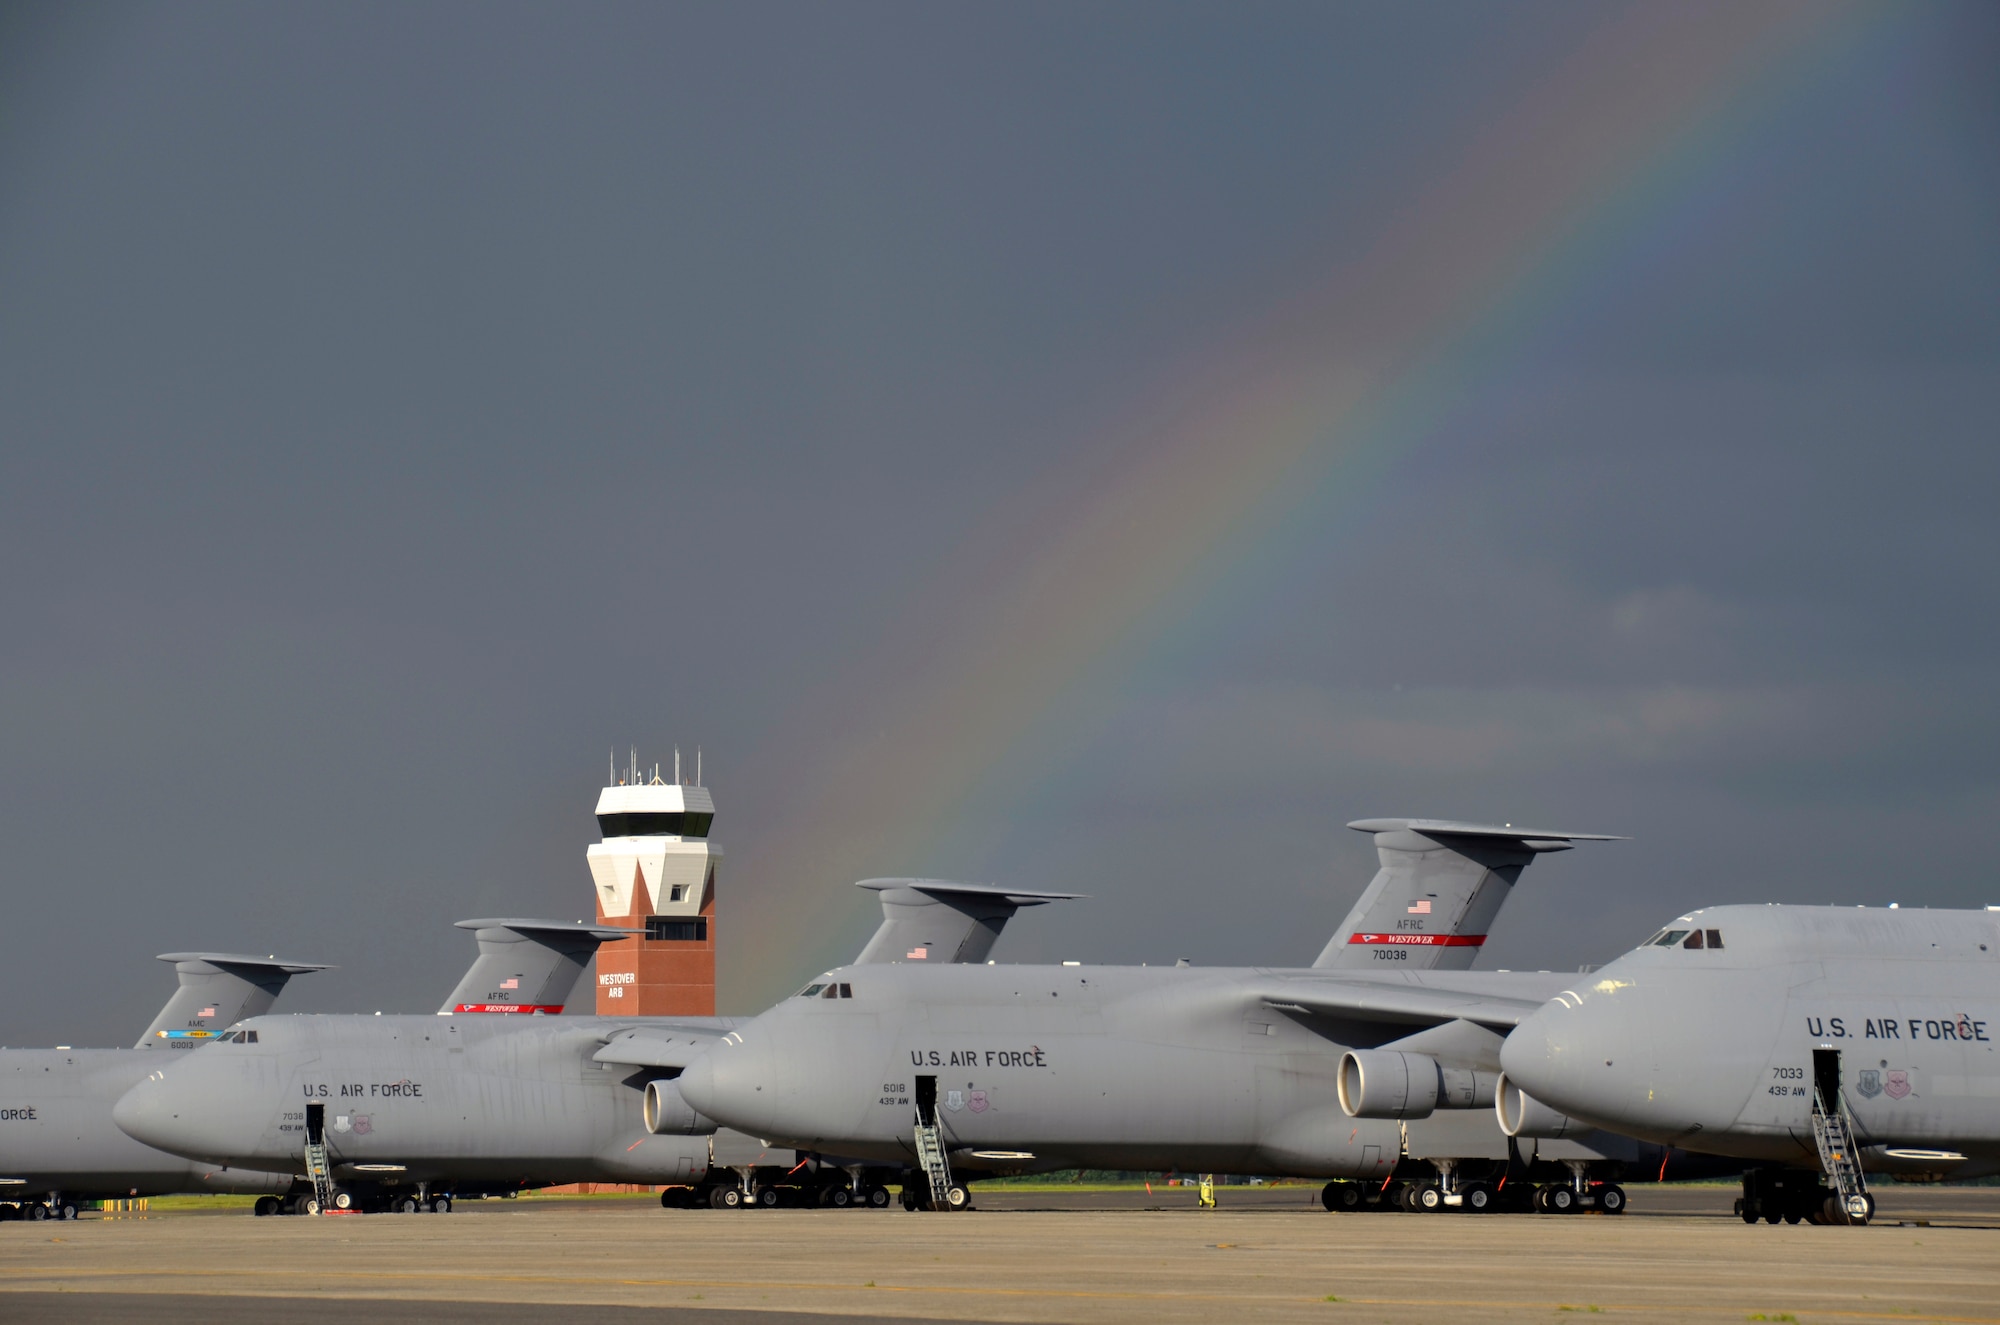 Westover's flight line hosts not only the Patriot Wing's 16 C-5Bs but also a re-engined Dover C-5M model, far left, May 25. The modernization of the C-5 boasts upgraded engines that deliver 22 percent more thrust, 30 percent shorter take-off roll and 58 percent faster climb rate, which allow cargo to be carried over longer distances without refueling. The engines are also three times quieter.  These upgrades earn this C-5 the title "Super Galaxy." (U.S. Air Force photo/SrA. Kelly Galloway)